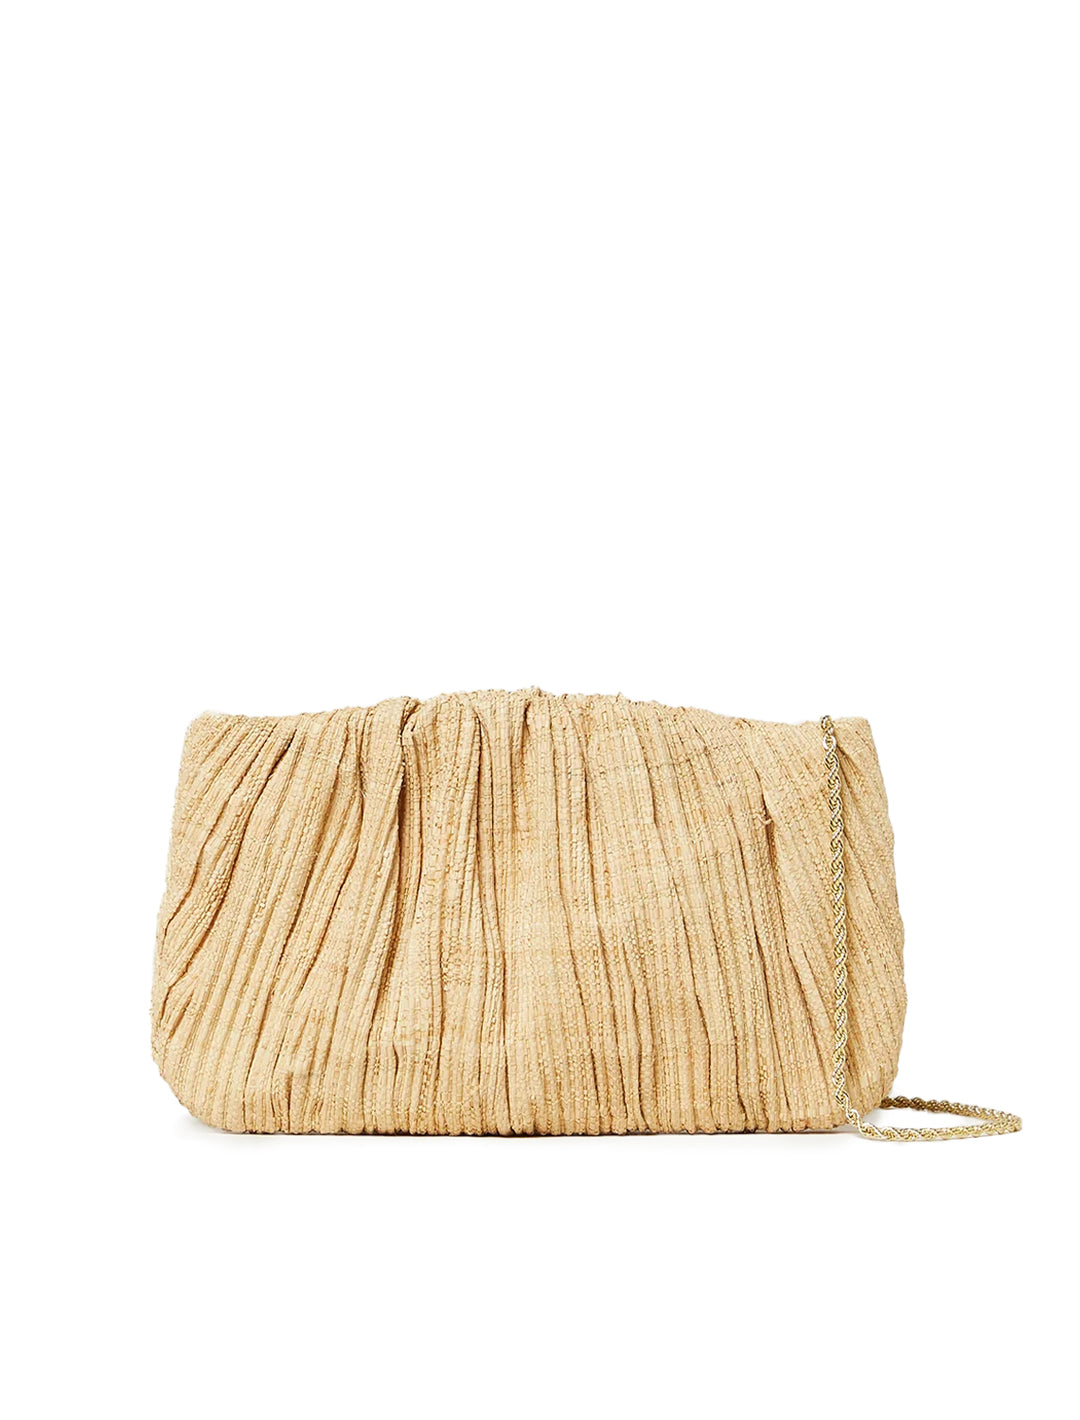 Front view of Loeffler Randall's brit flat pleated pouch in natural.